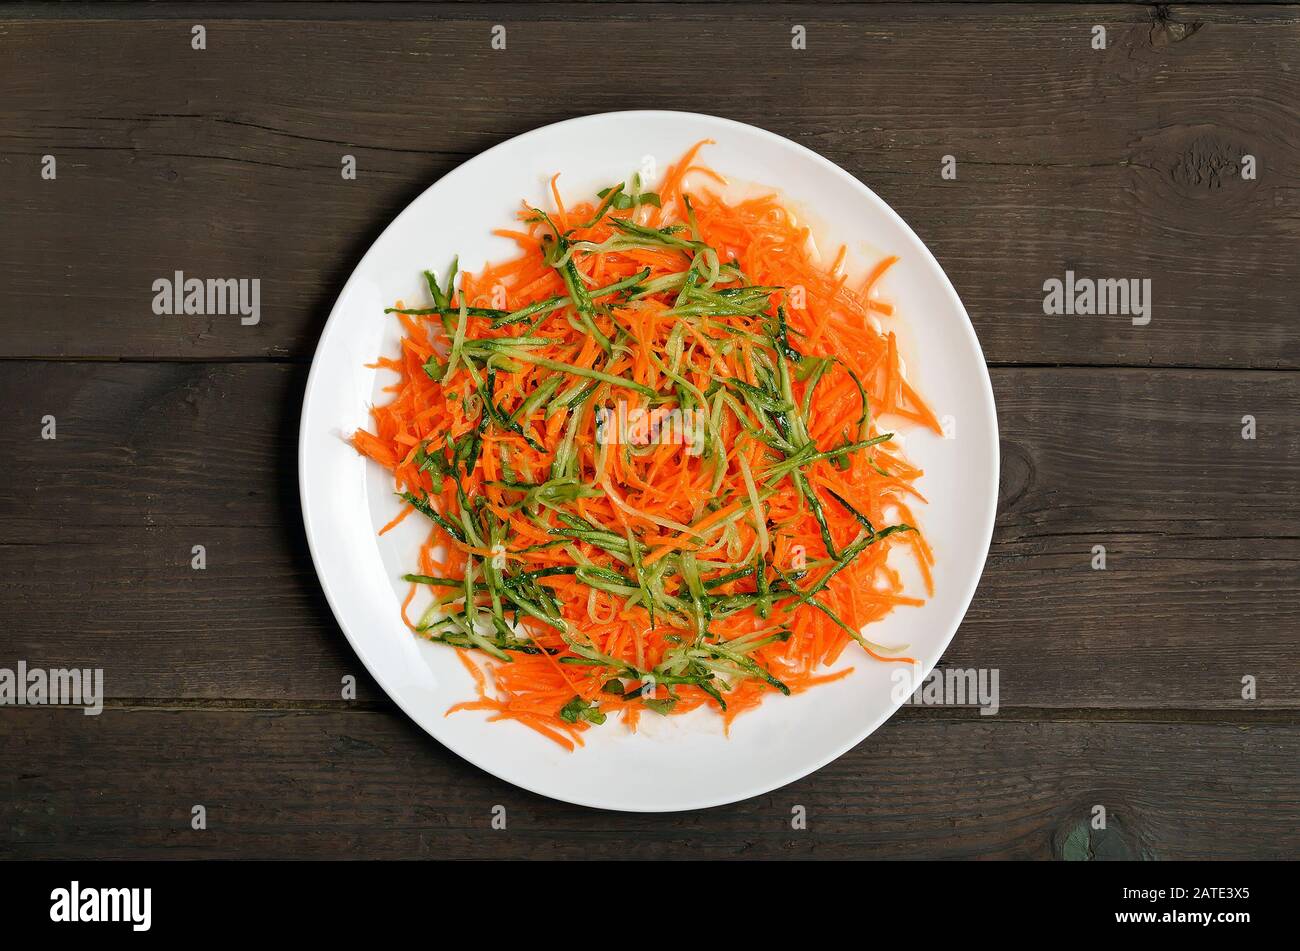 Vegetables salad with carrot and cucumber on wooden table, top view Stock Photo